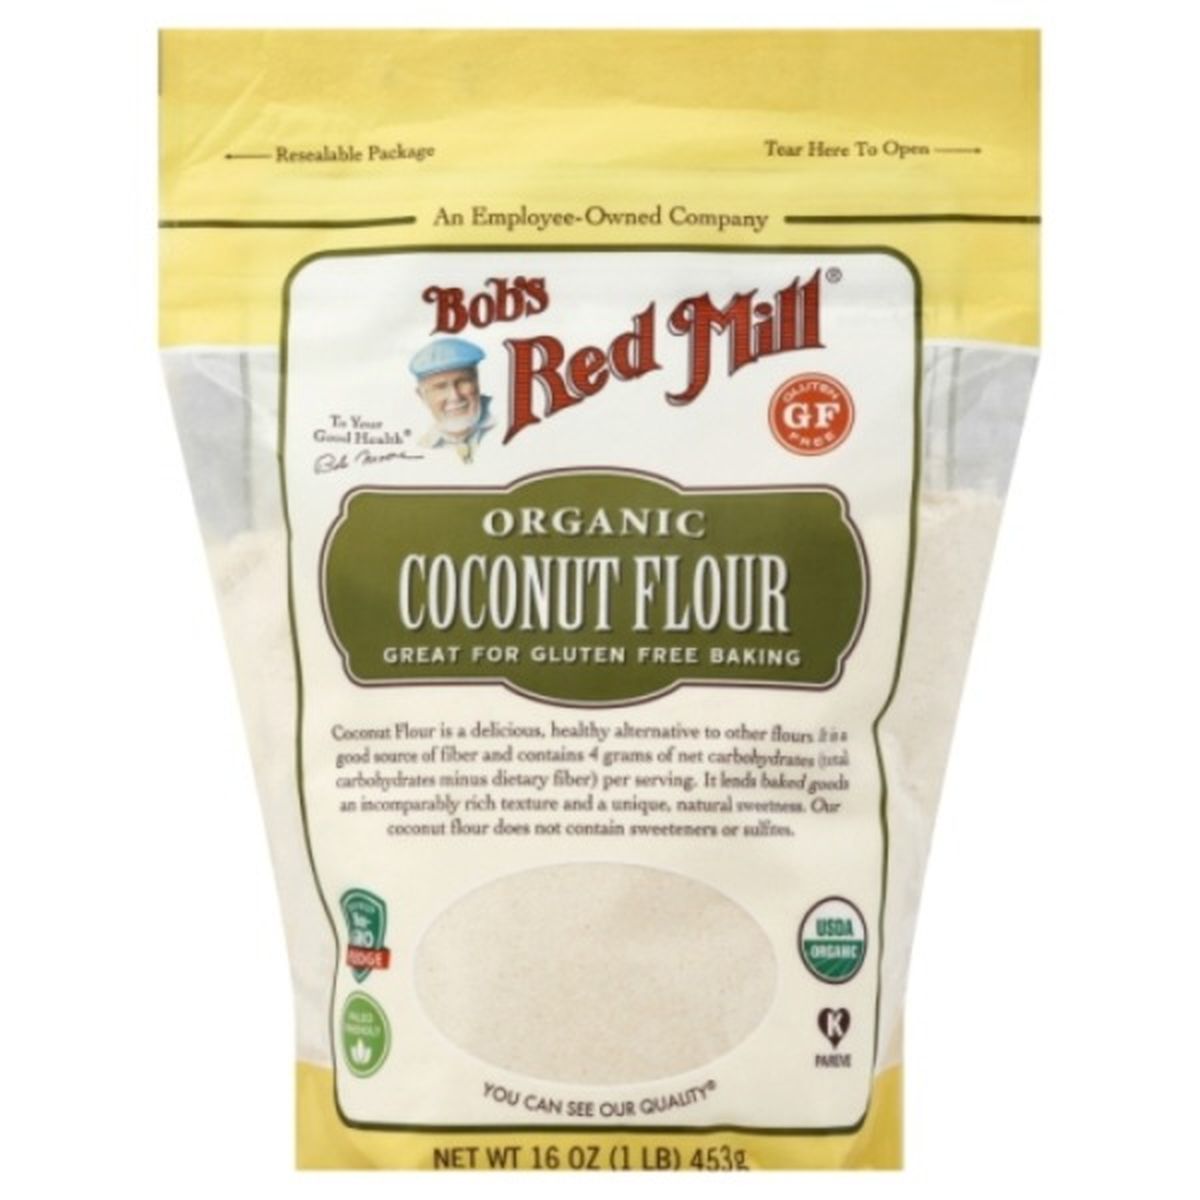 Calories in Bob's Red Mill Coconut Flour, Organic